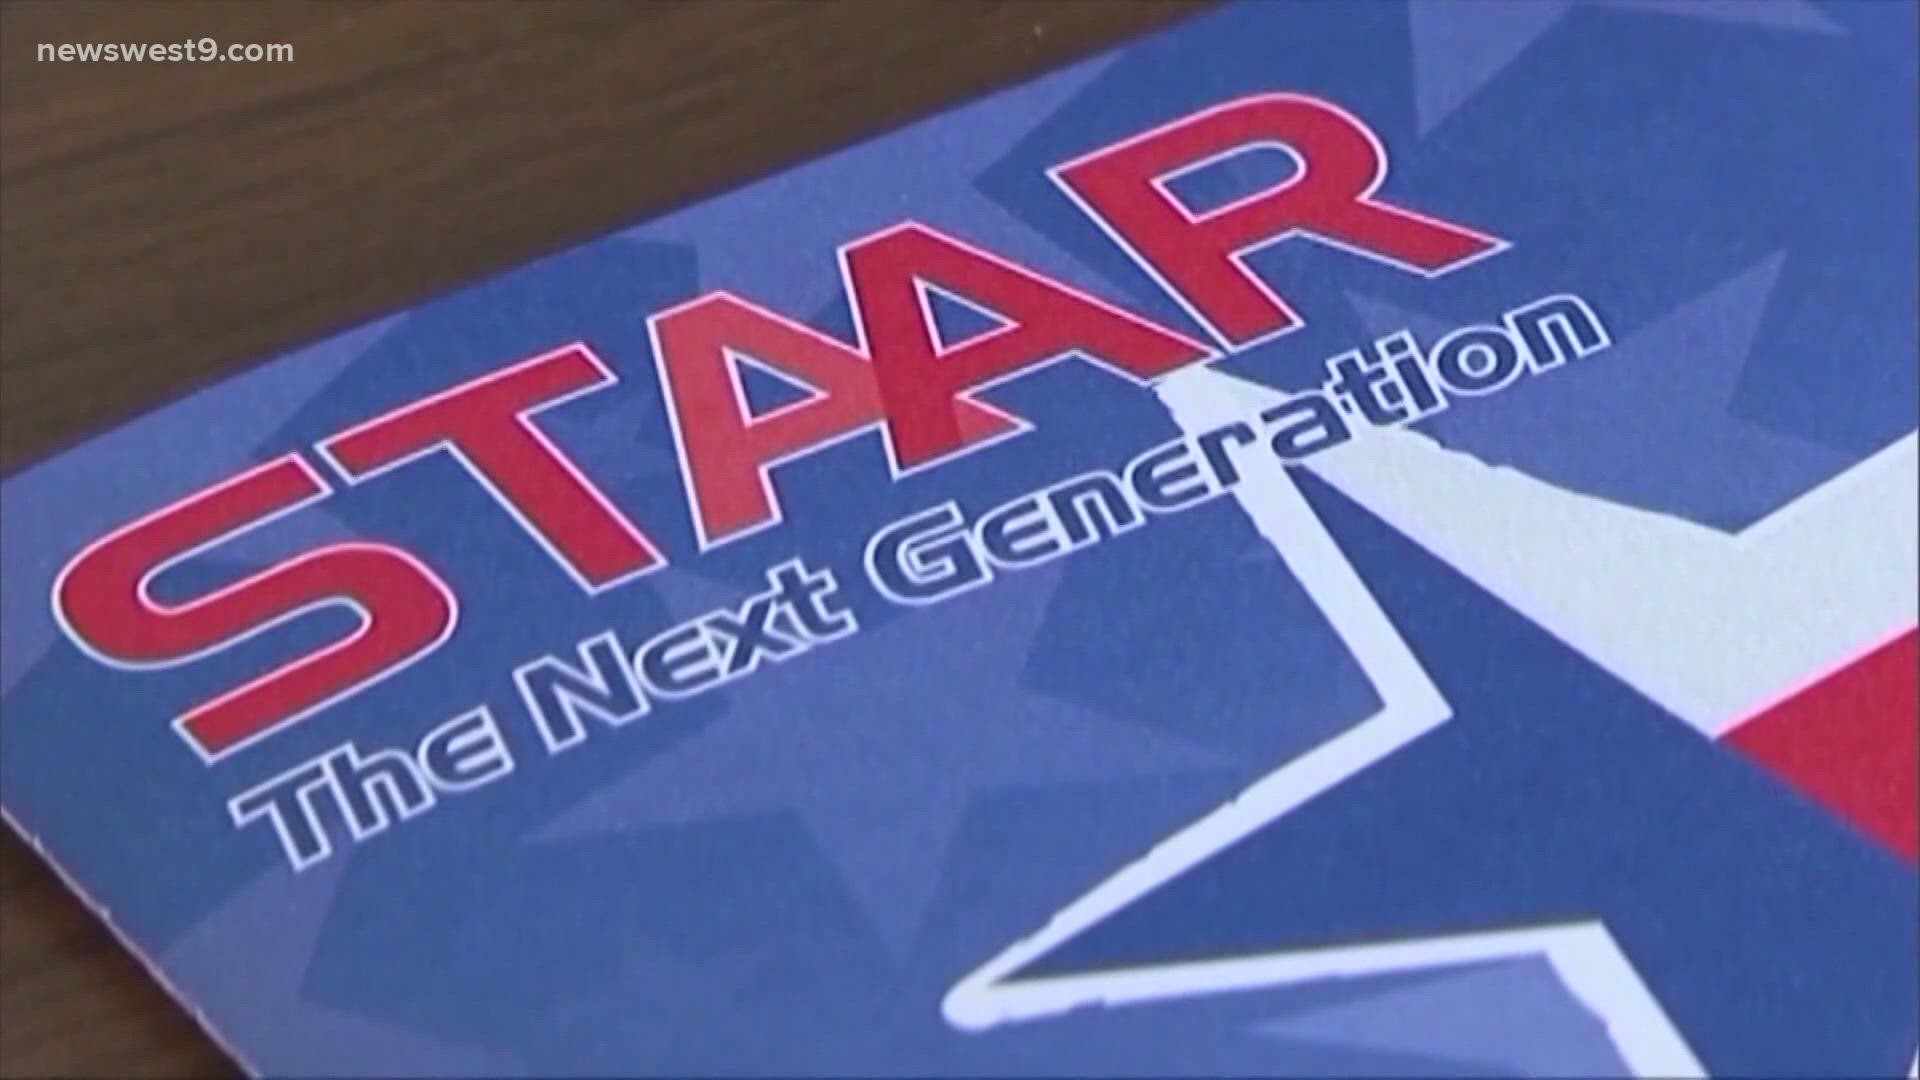 The state of Texas released its STAAR test results, and while those results were down across the board, MISD performed better than the state average.